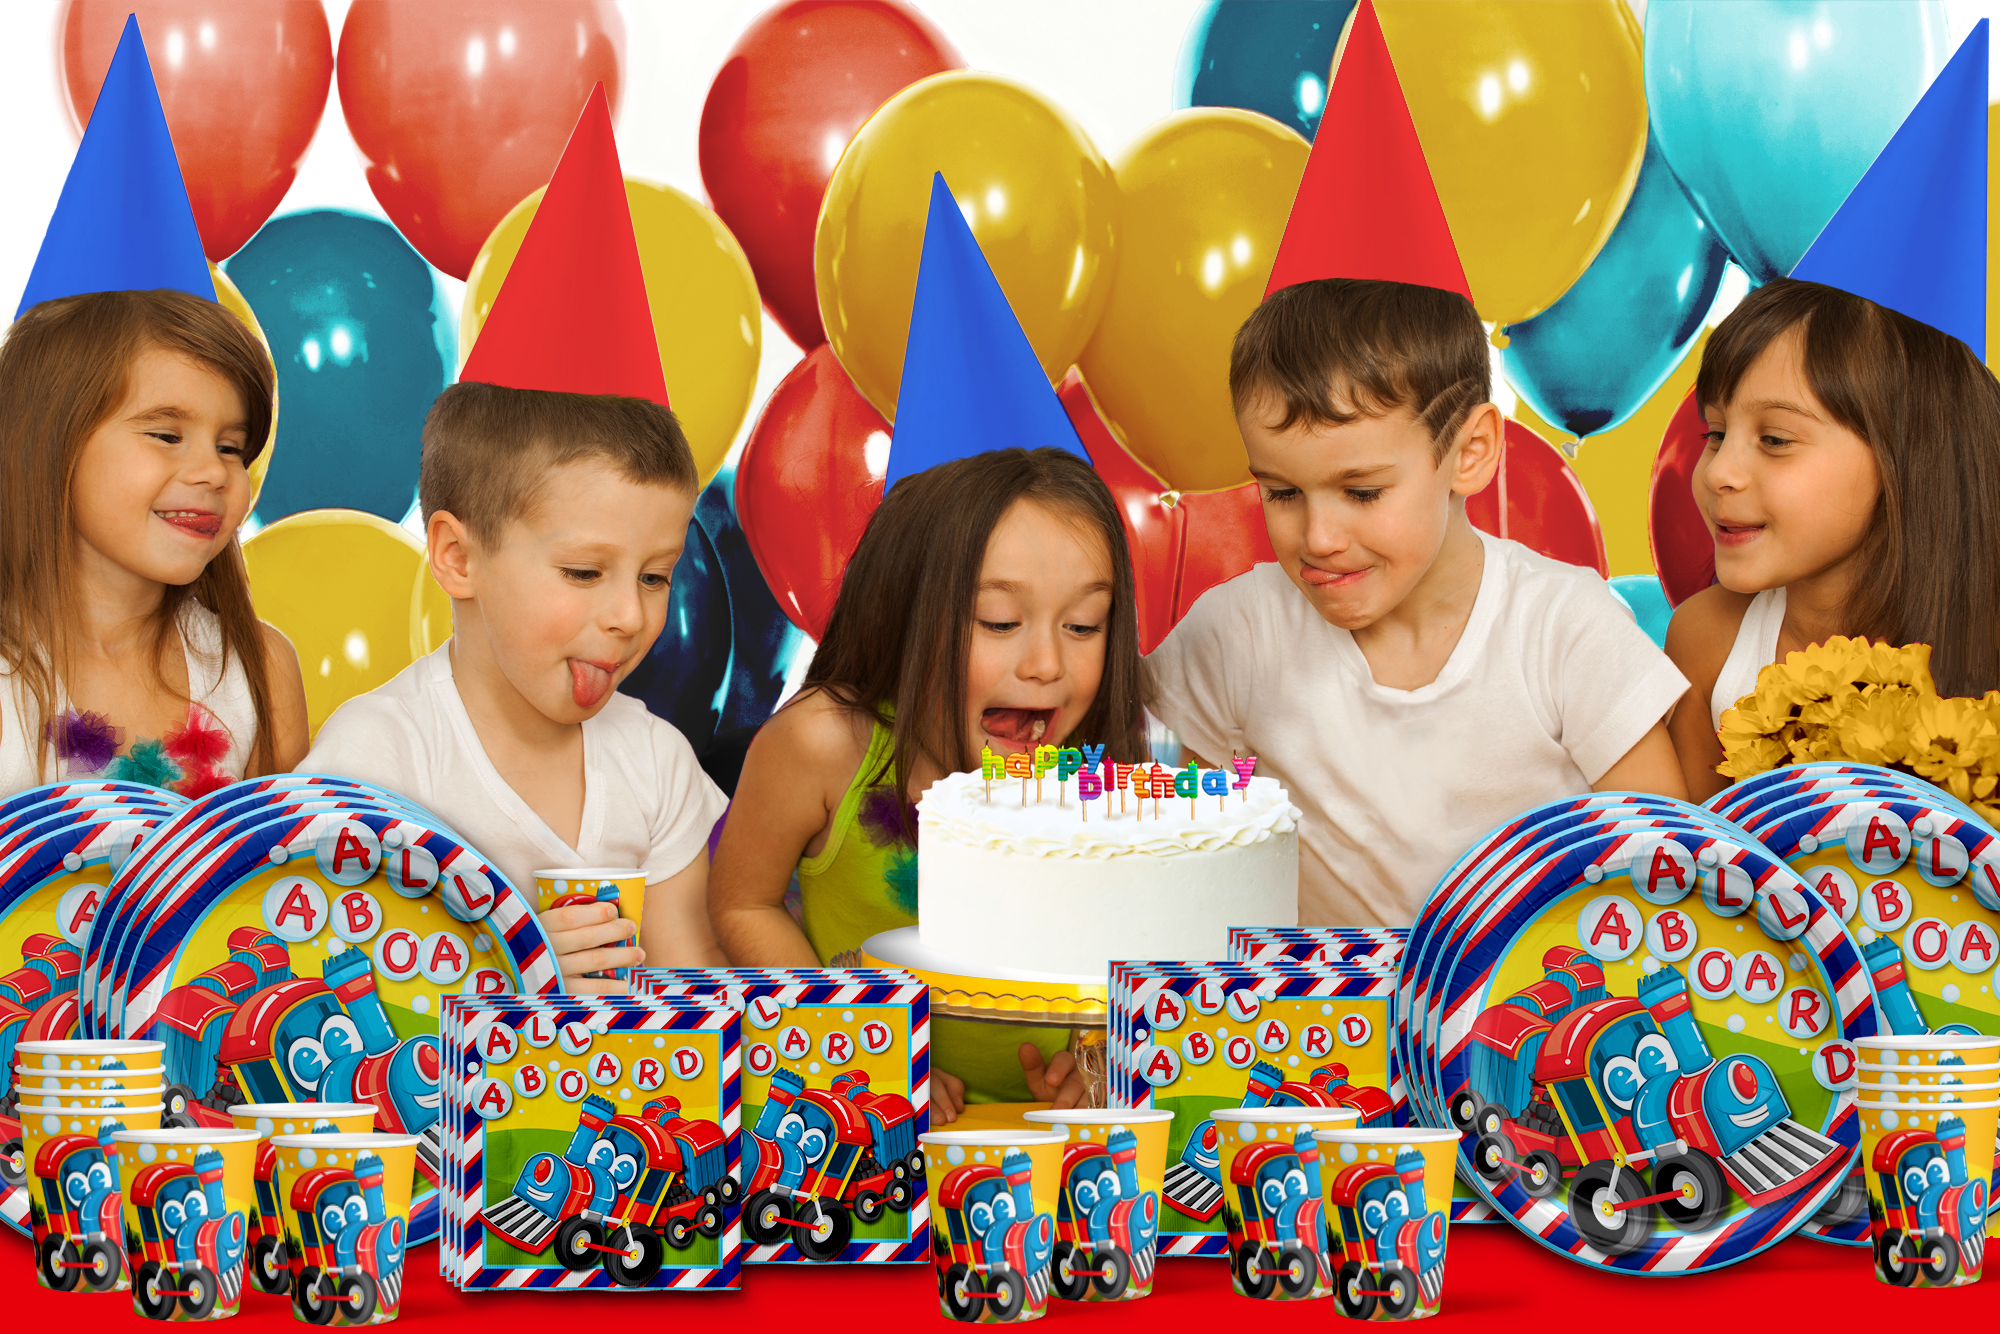 All Aboard! Train Birthday Party Tableware Kit For 16 Guests